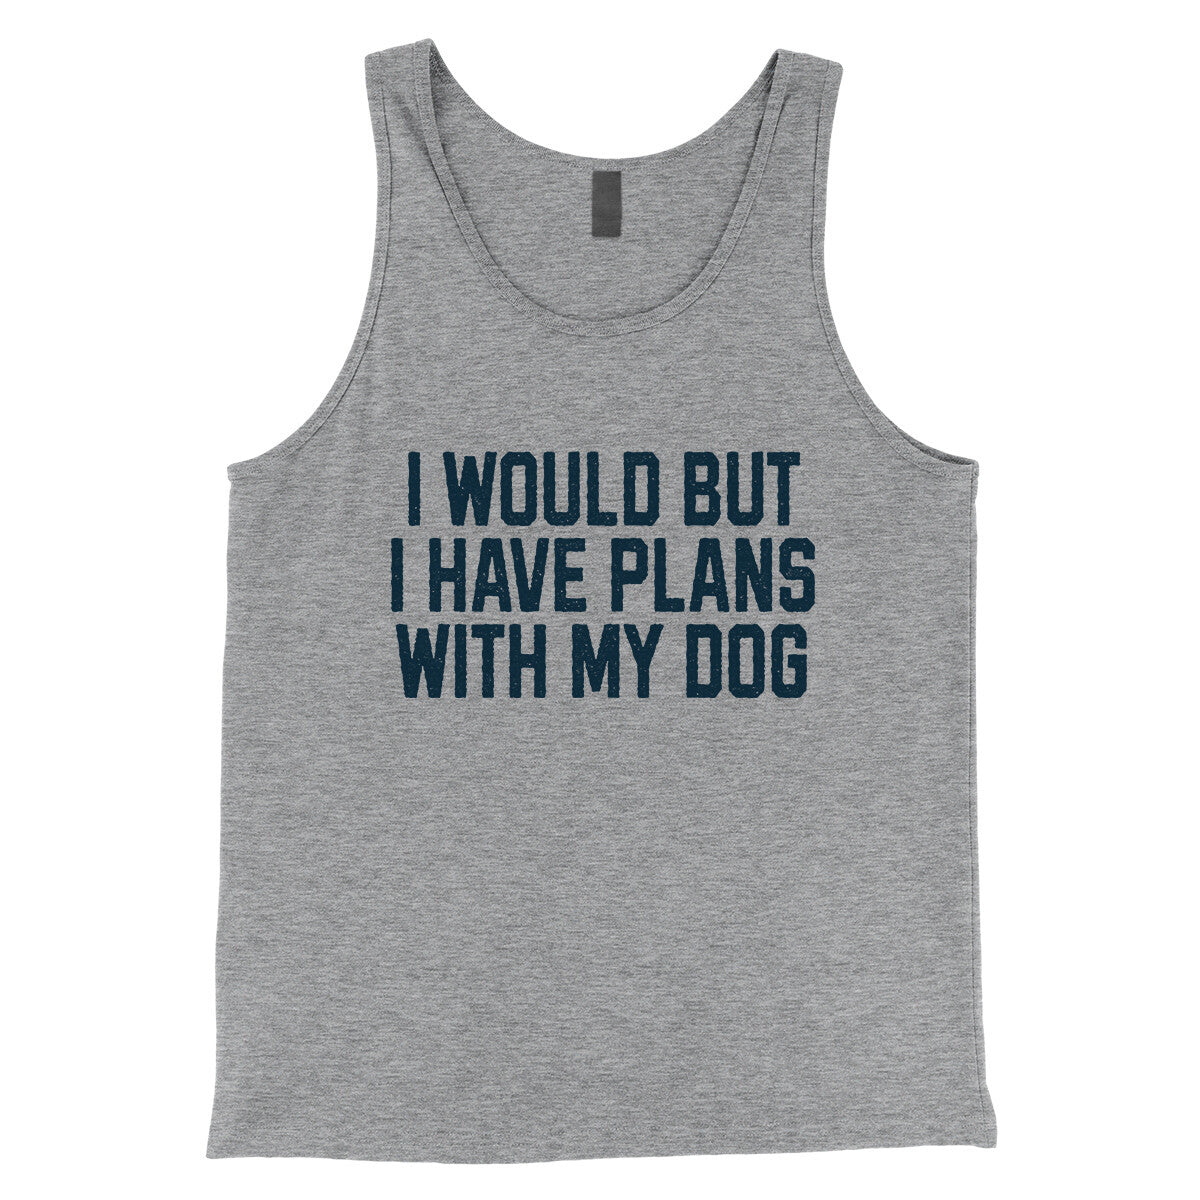 I Would but I Have Plans with My Dog in Athletic Heather Color